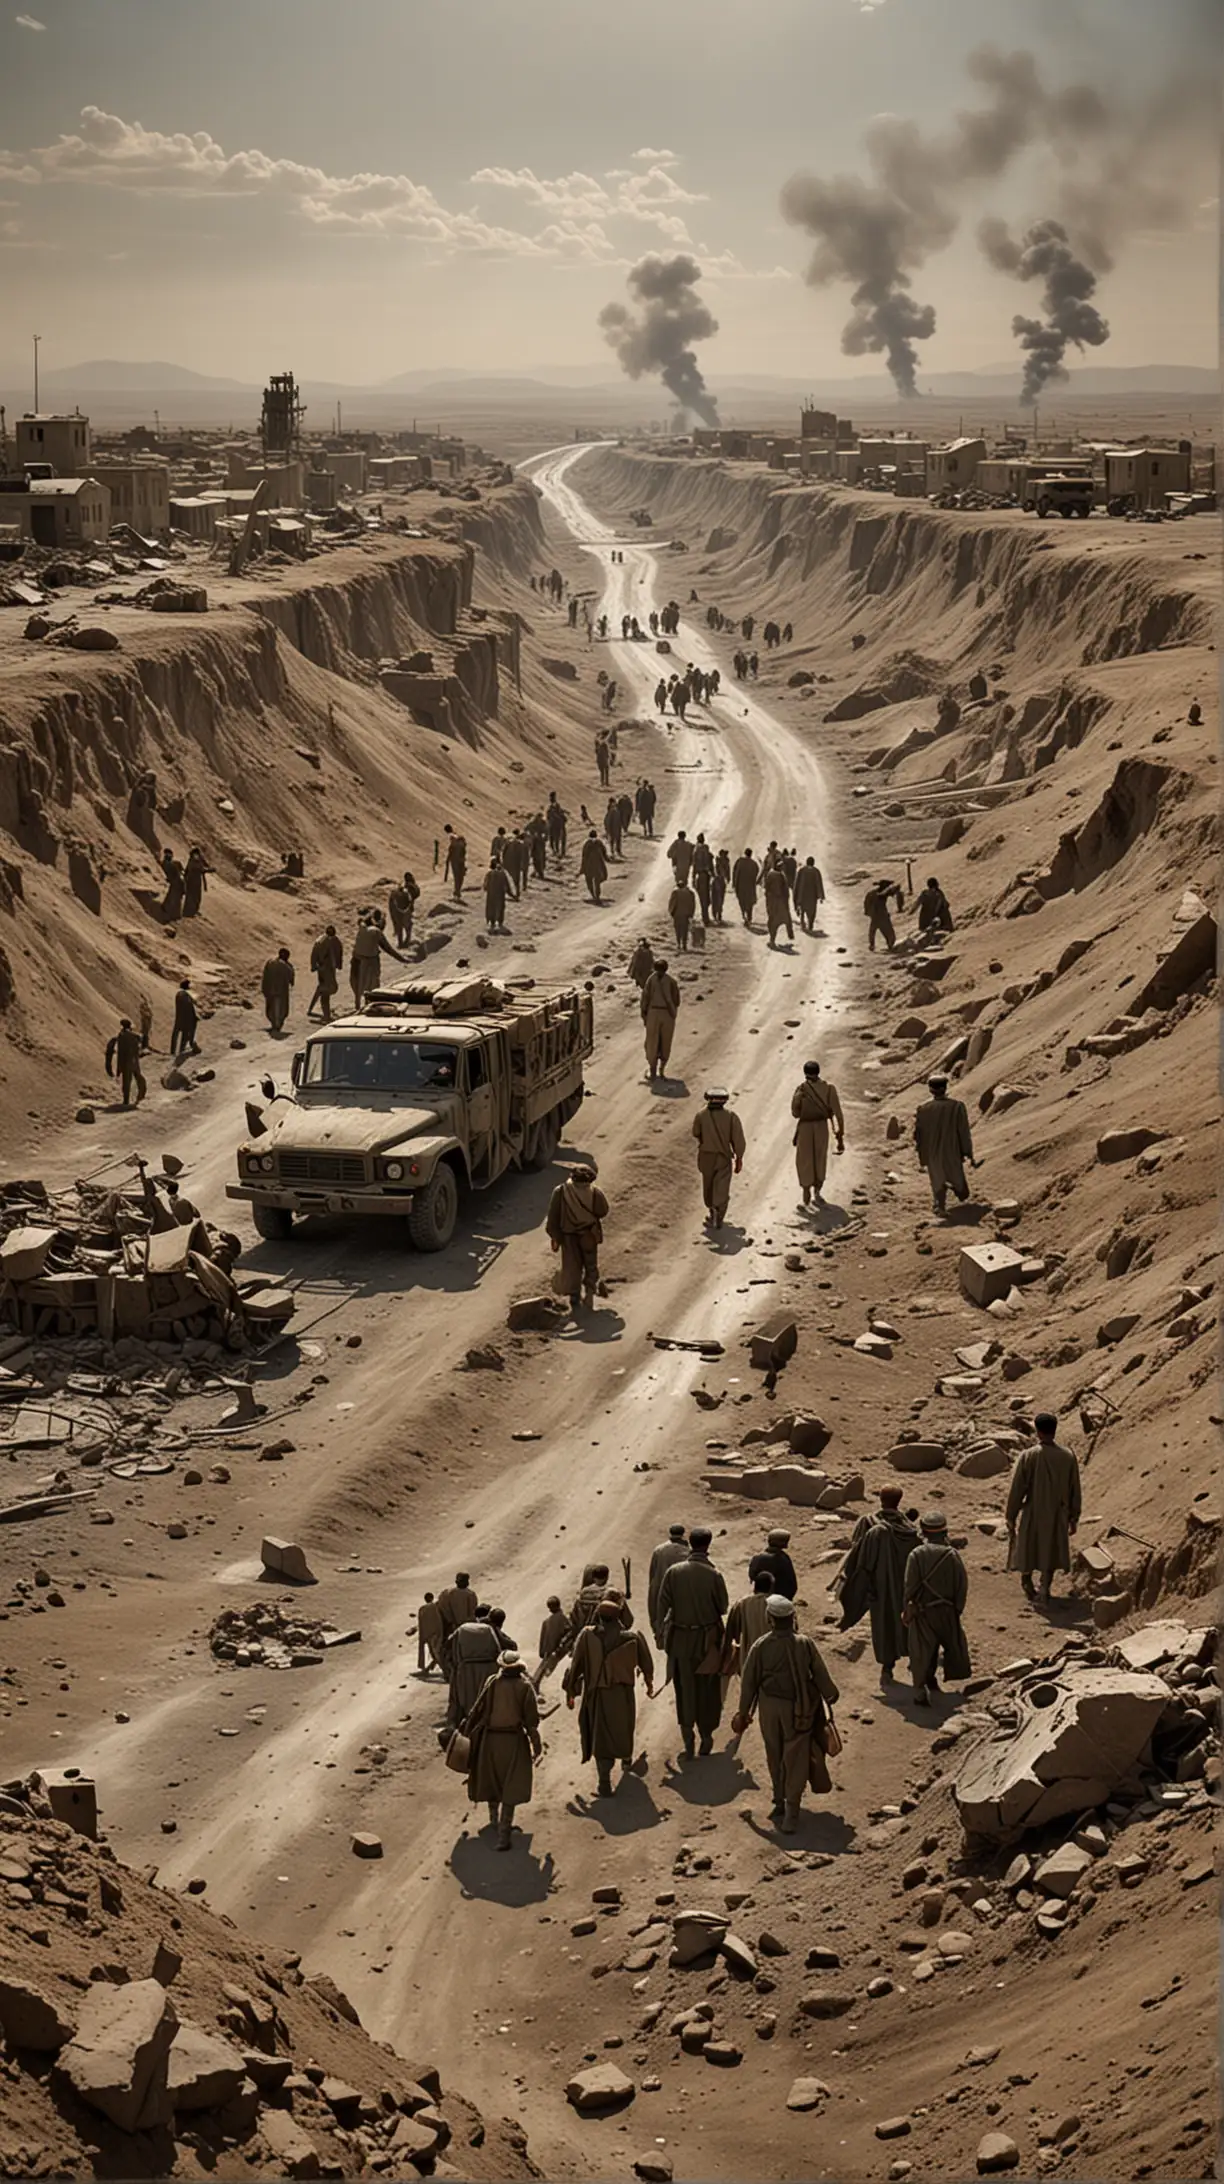 Create a dramatic scene depicting the withdrawal of Soviet troops from Afghanistan, showcasing the crumbling infrastructure and desolate landscape.